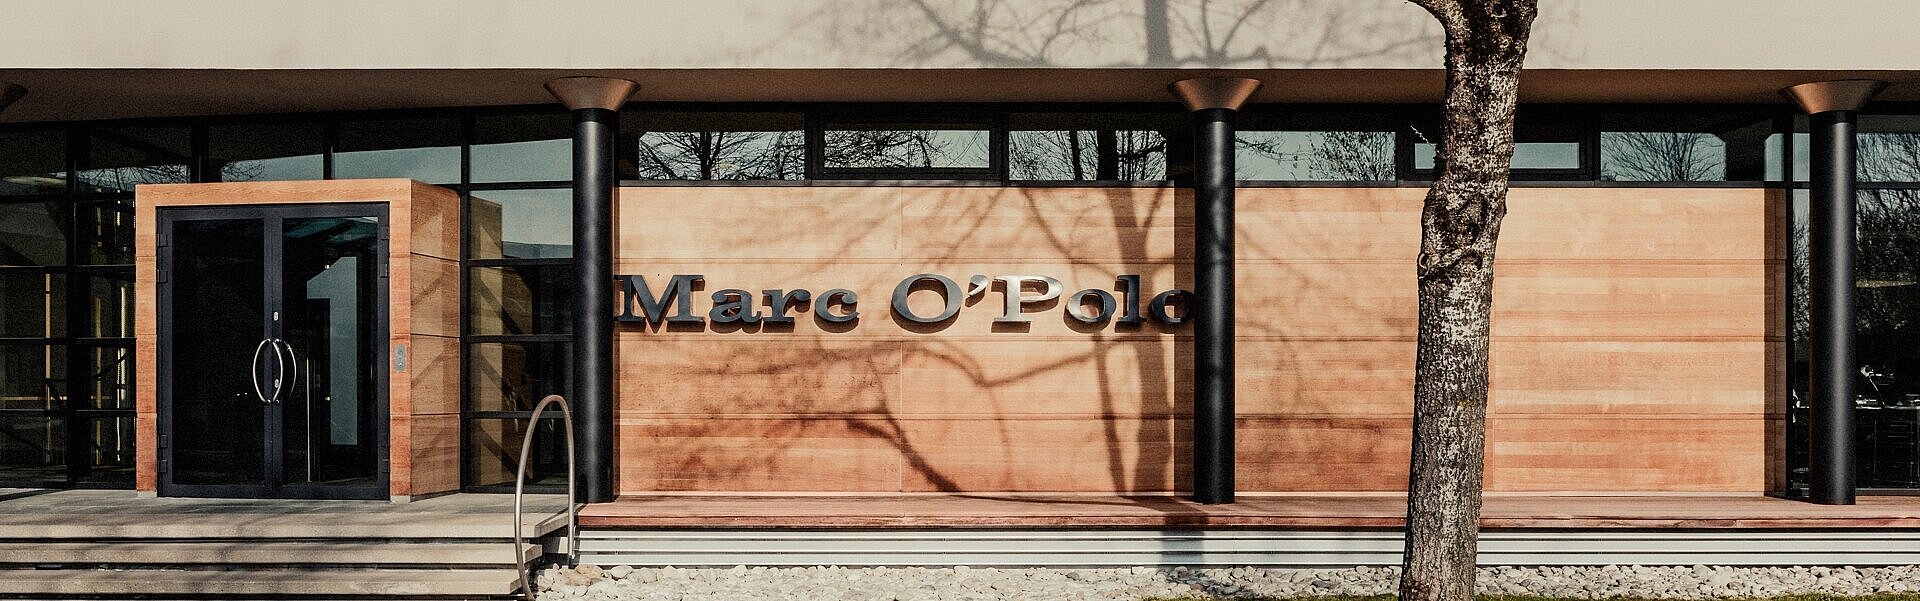 Building Marc O Polo with lettering in front, wooden facade, tree and street in front of it